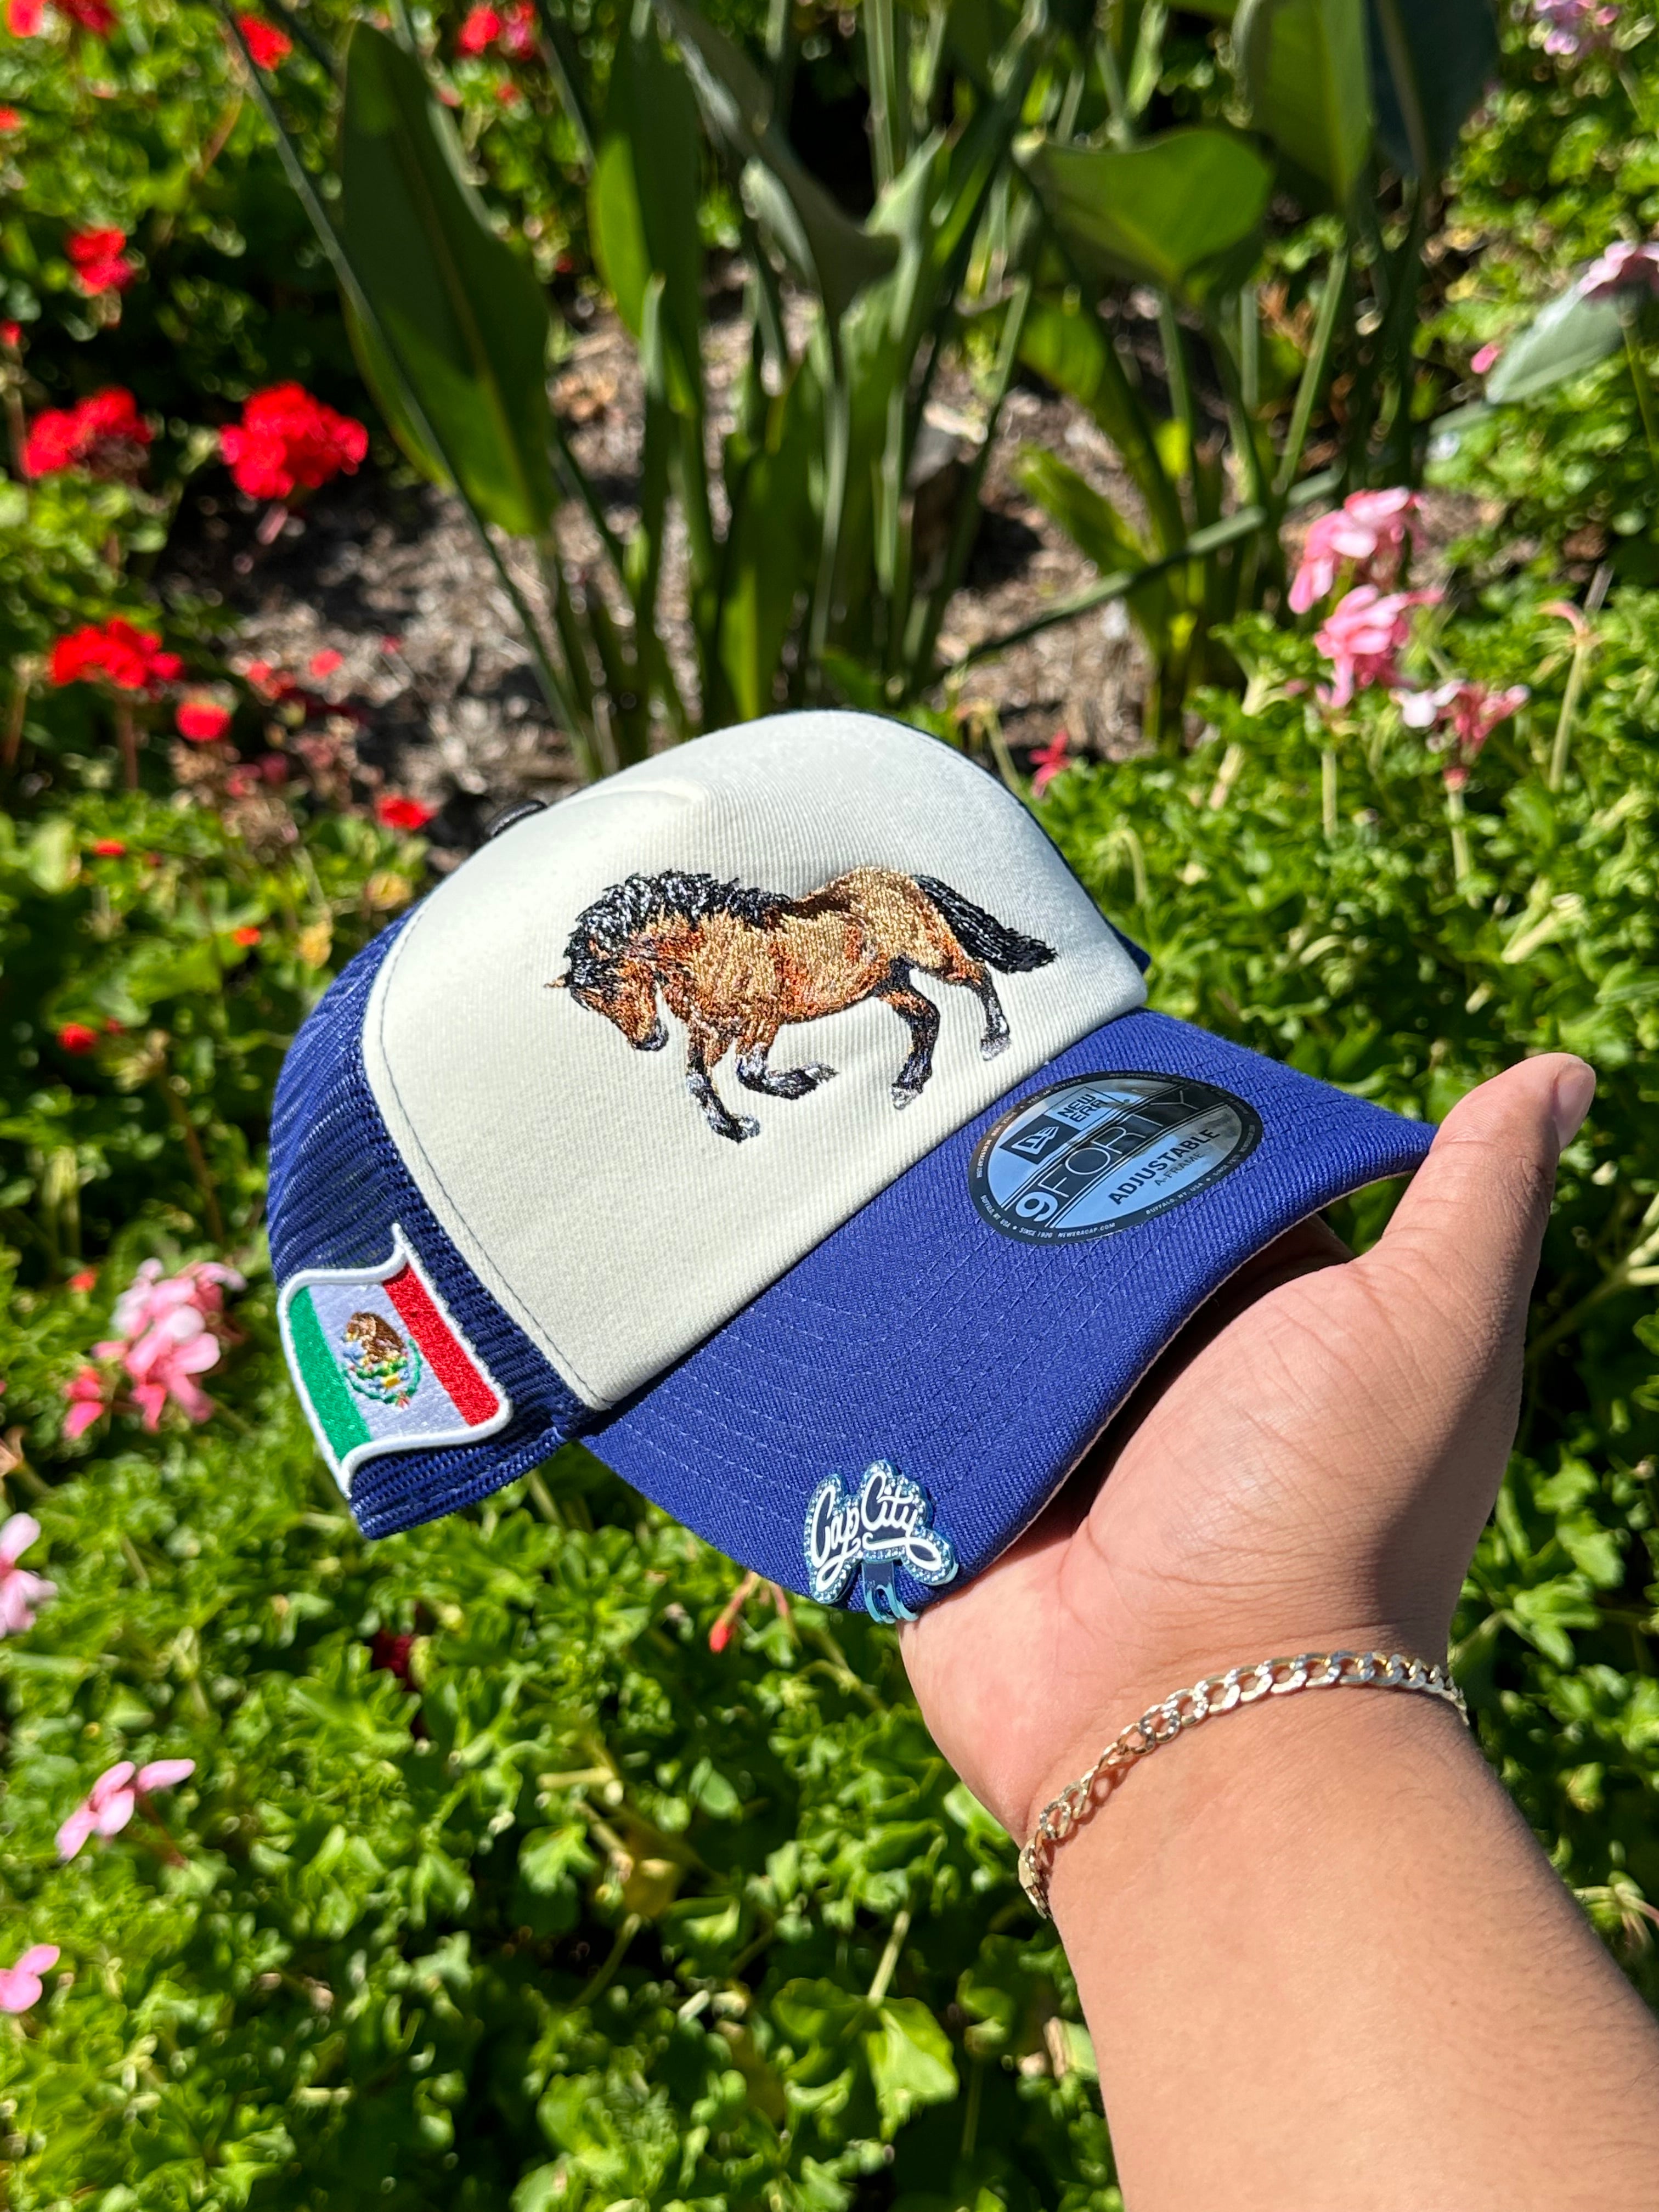 NEW ERA EXCLUSIVE 9FORTY CHROME WHITE/BLUE "EL CABALLO" A-FRAME ADJUSTABLE W/ MEXICO FLAG SIDE PATCH